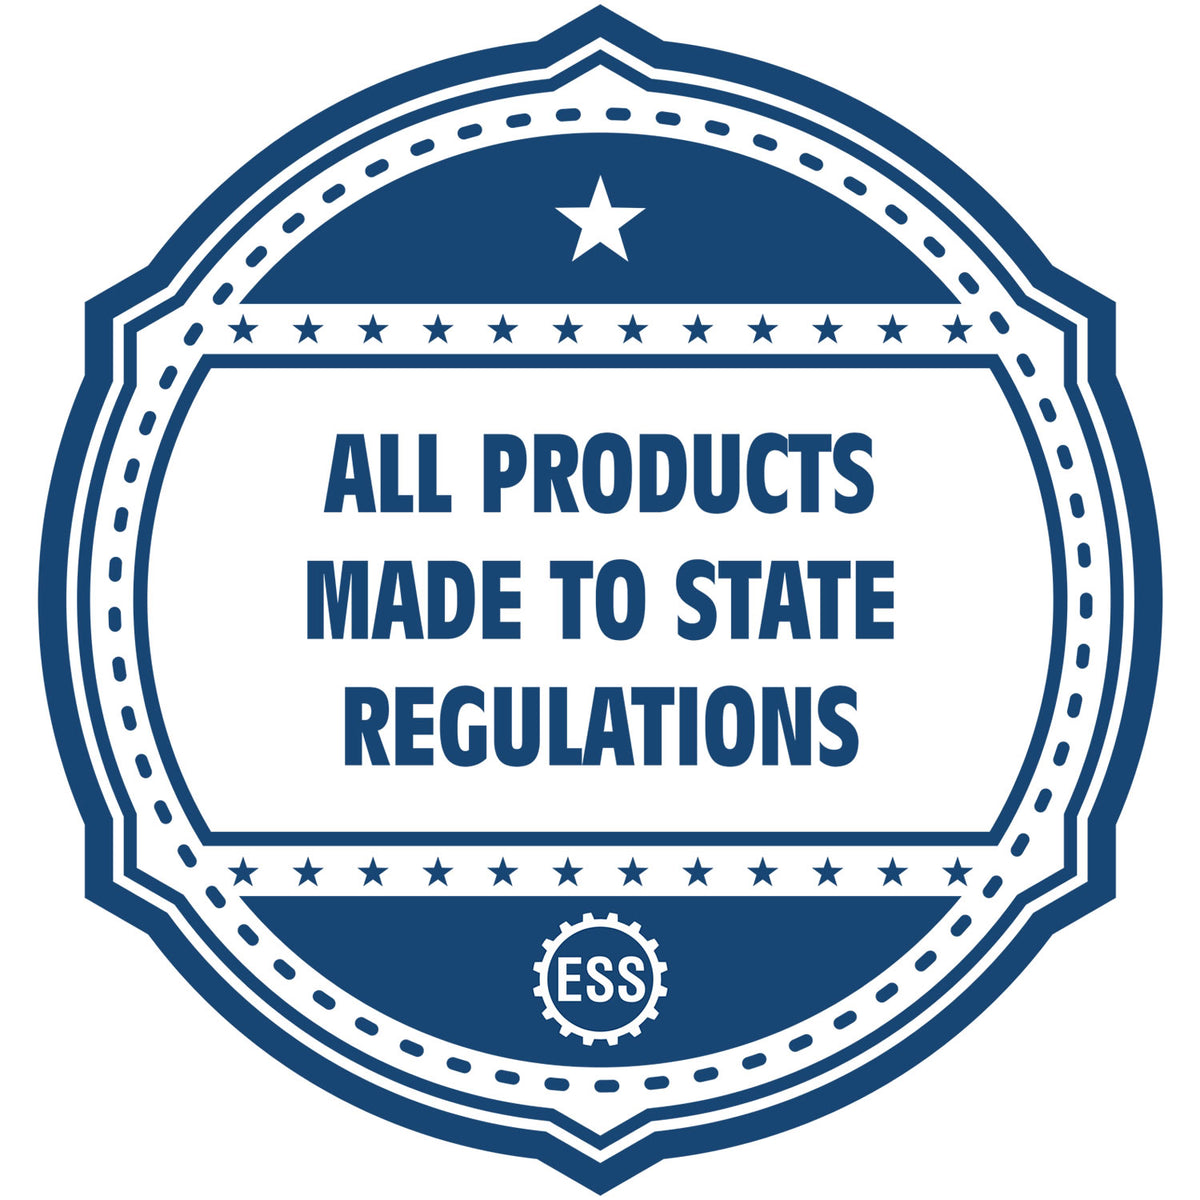 An icon or badge element for the State of New Hampshire Extended Long Reach Engineer Seal showing that this product is made in compliance with state regulations.